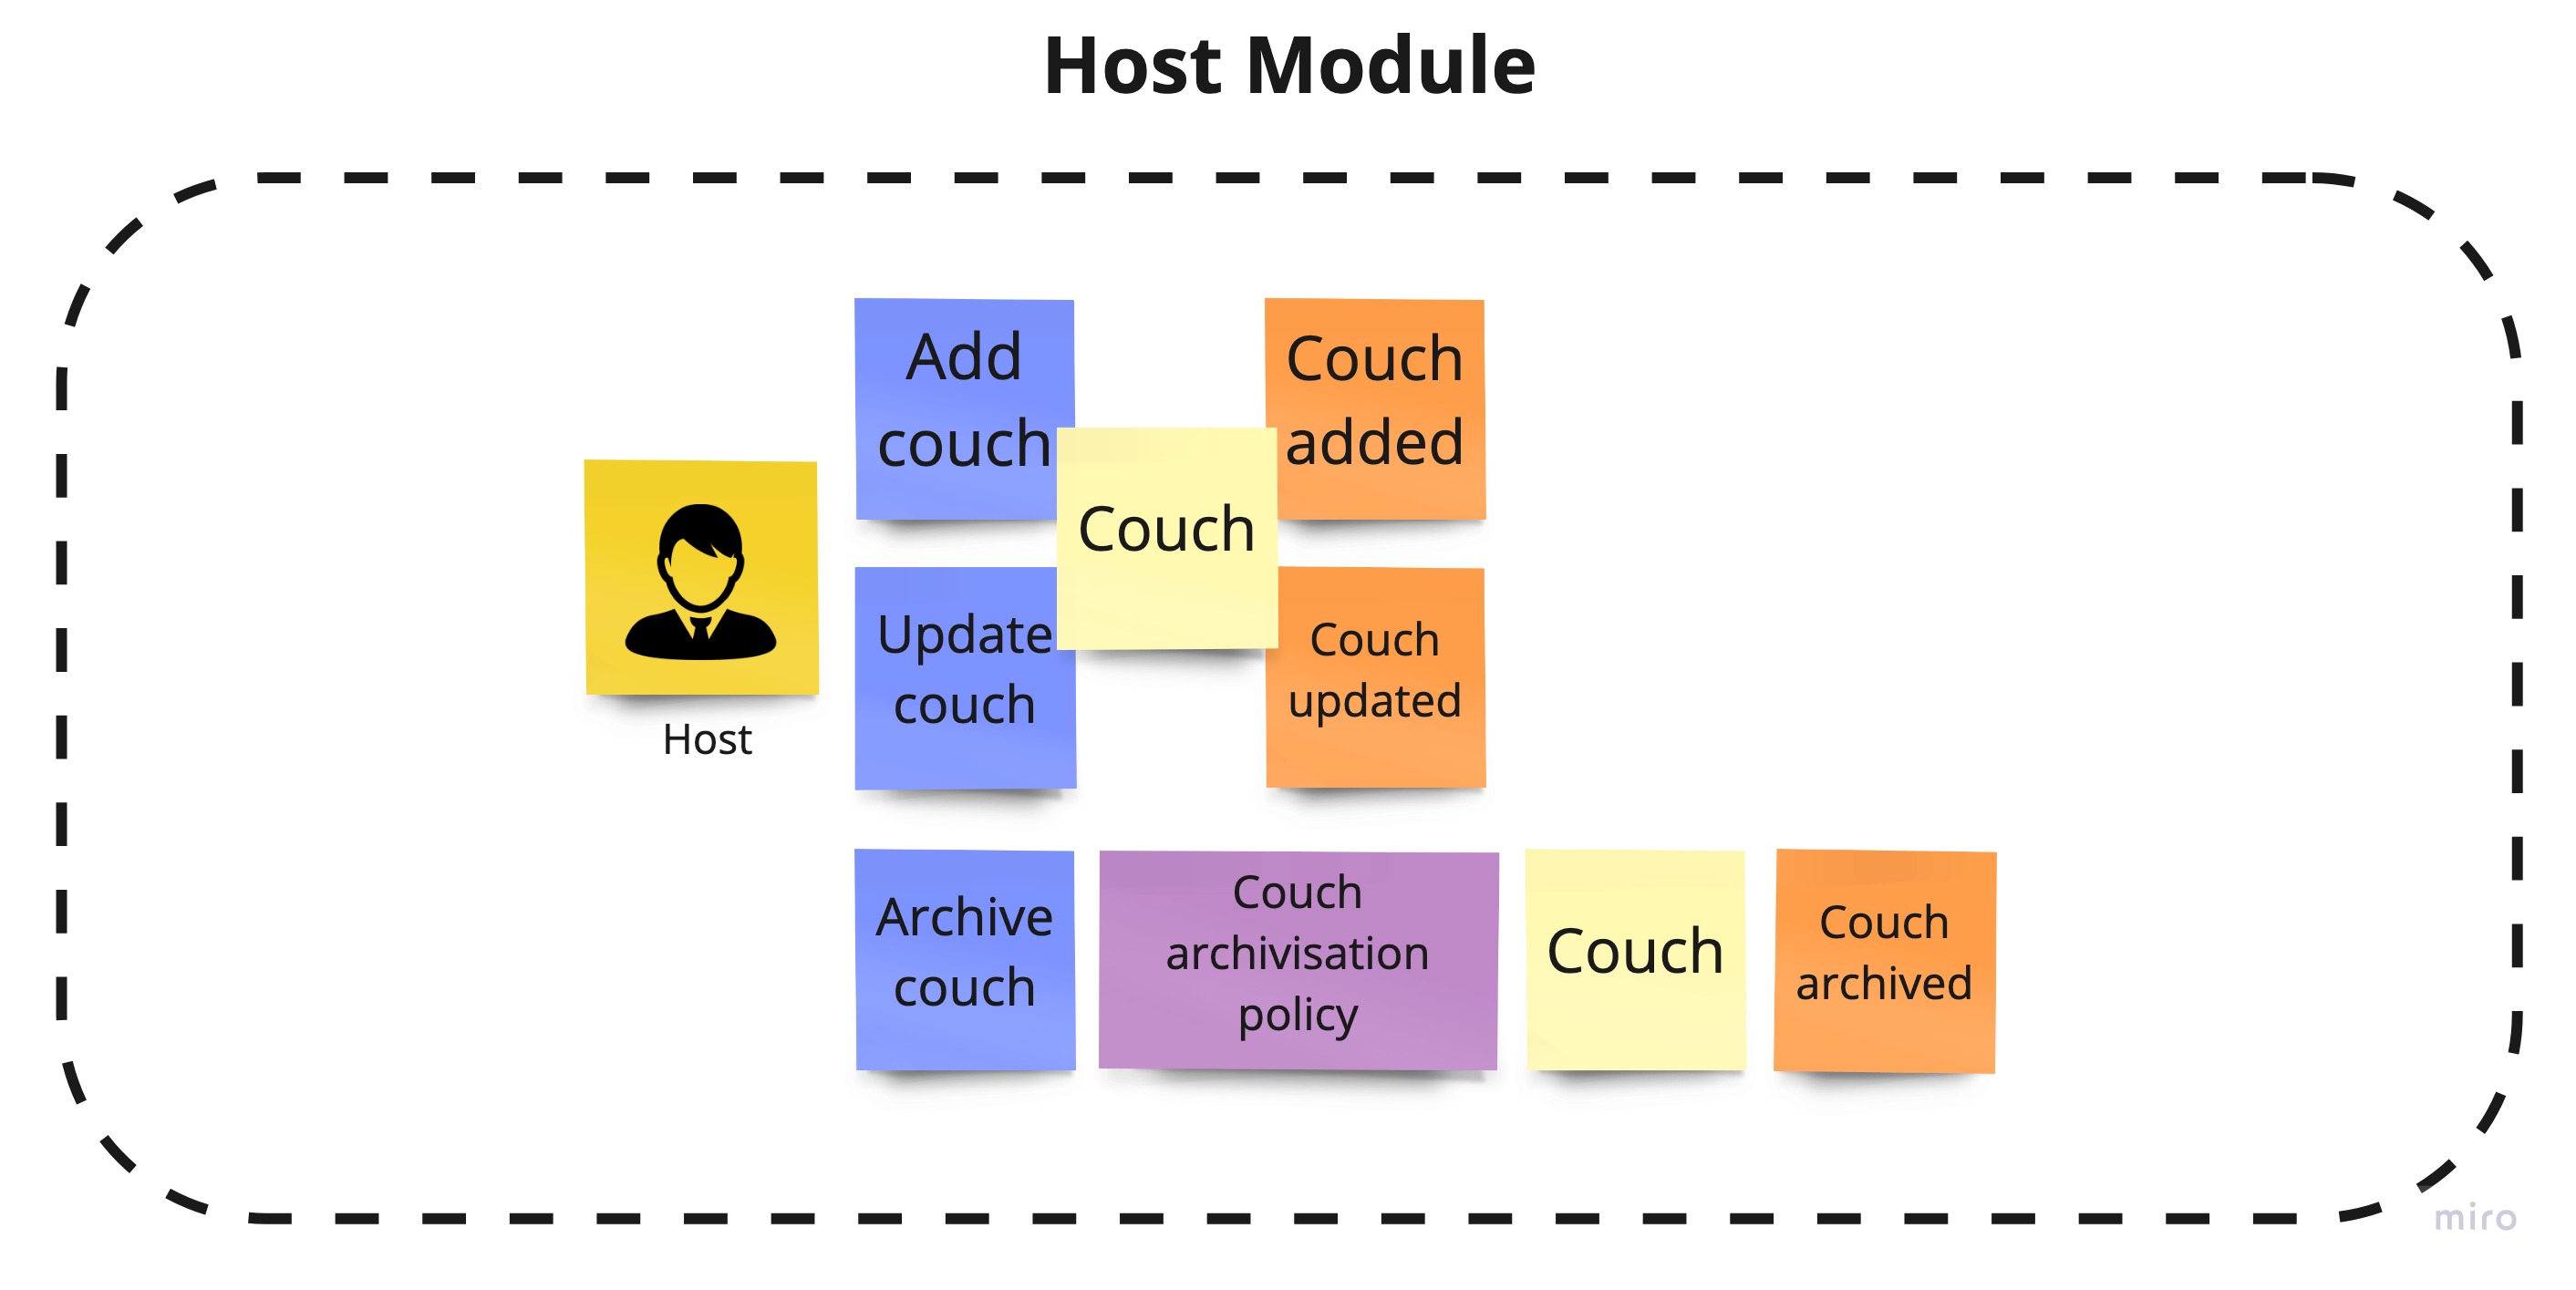 Couch module